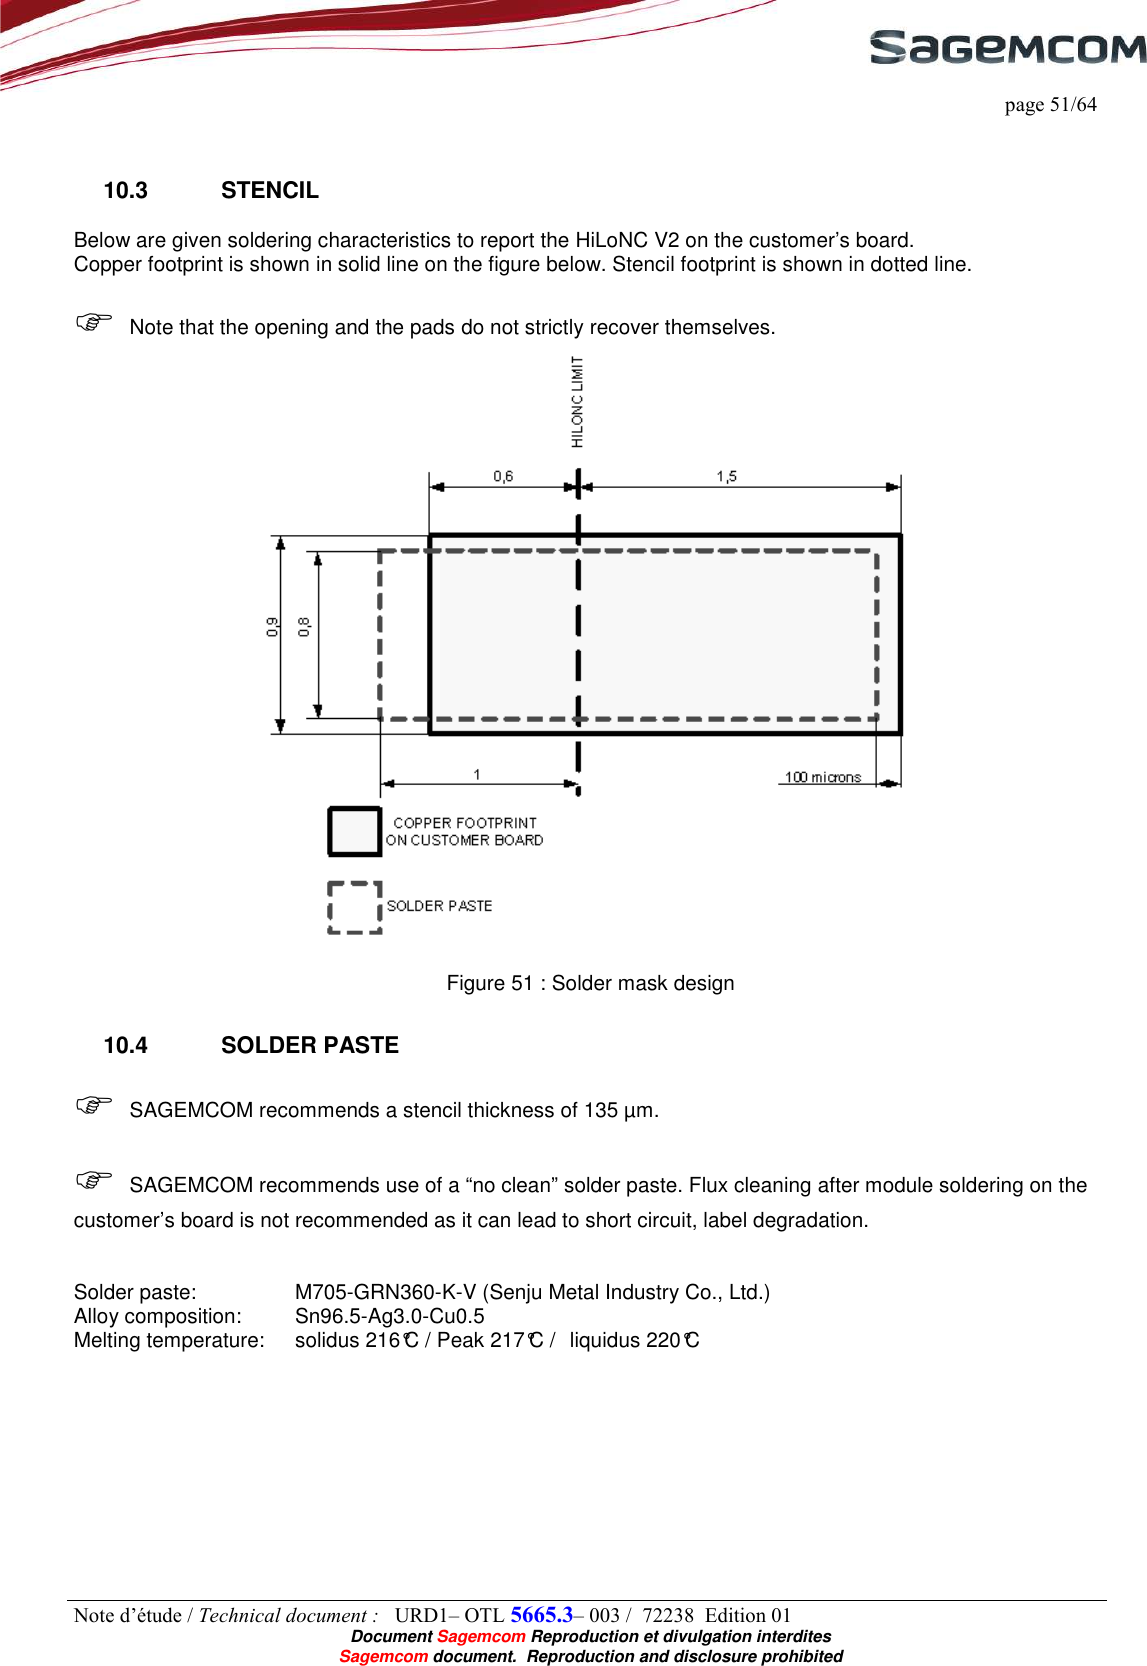     page 51/64 Note d’étude / Technical document :   URD1– OTL 5665.3– 003 /  72238  Edition 01  Document Sagemcom Reproduction et divulgation interdites Sagemcom document.  Reproduction and disclosure prohibited  10.3  STENCIL Below are given soldering characteristics to report the HiLoNC V2 on the customer’s board.  Copper footprint is shown in solid line on the figure below. Stencil footprint is shown in dotted line.    Note that the opening and the pads do not strictly recover themselves.   Figure 51 : Solder mask design 10.4  SOLDER PASTE  SAGEMCOM recommends a stencil thickness of 135 µm.   SAGEMCOM recommends use of a “no clean” solder paste. Flux cleaning after module soldering on the customer’s board is not recommended as it can lead to short circuit, label degradation.   Solder paste:     M705-GRN360-K-V (Senju Metal Industry Co., Ltd.) Alloy composition:   Sn96.5-Ag3.0-Cu0.5 Melting temperature:   solidus 216°C / Peak 217°C /  liquidus 220°C 